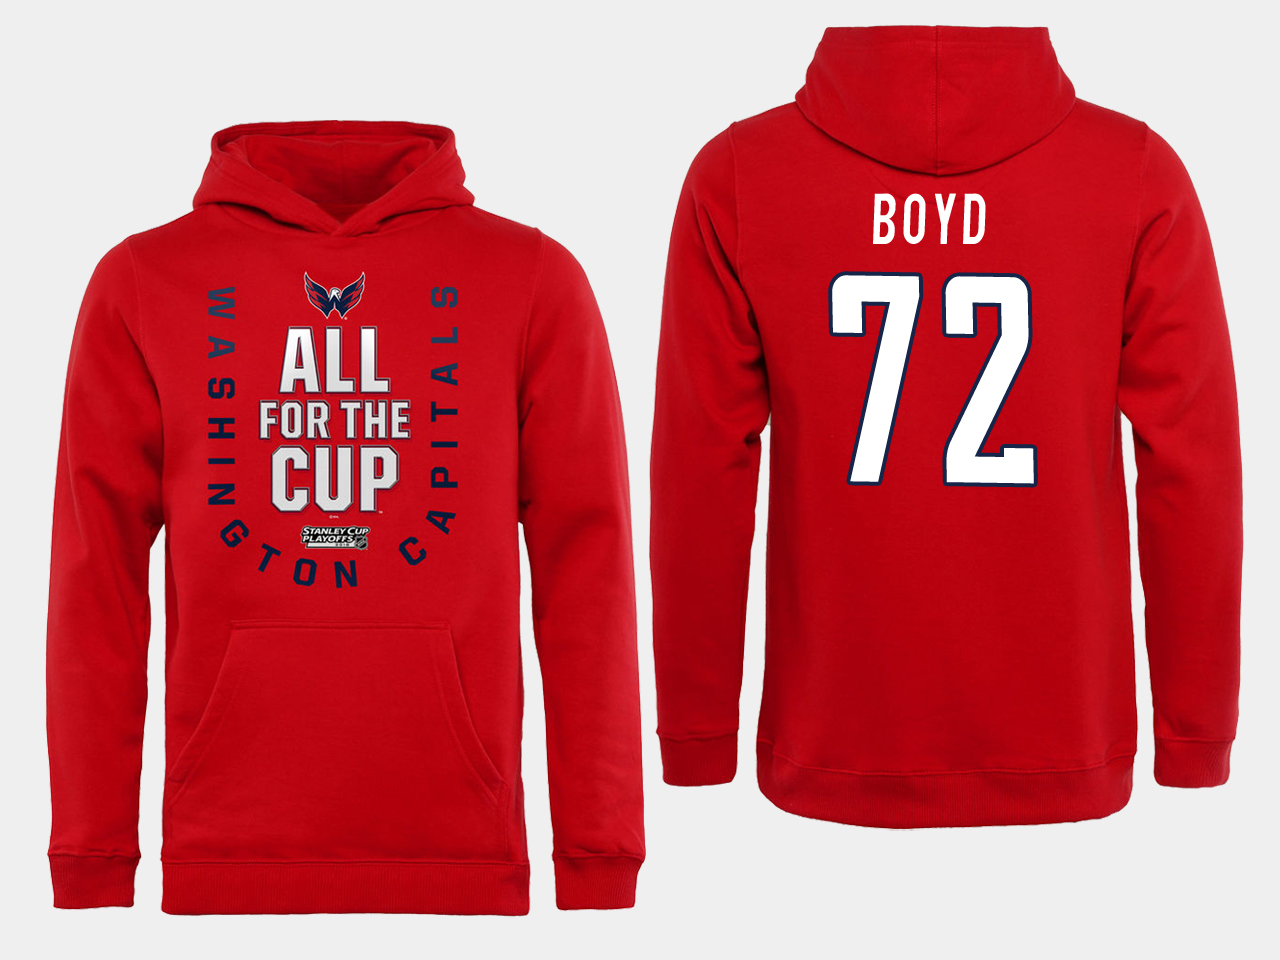 Men NHL Washington Capitals 72 Boyd Red All for the Cup Hoodie